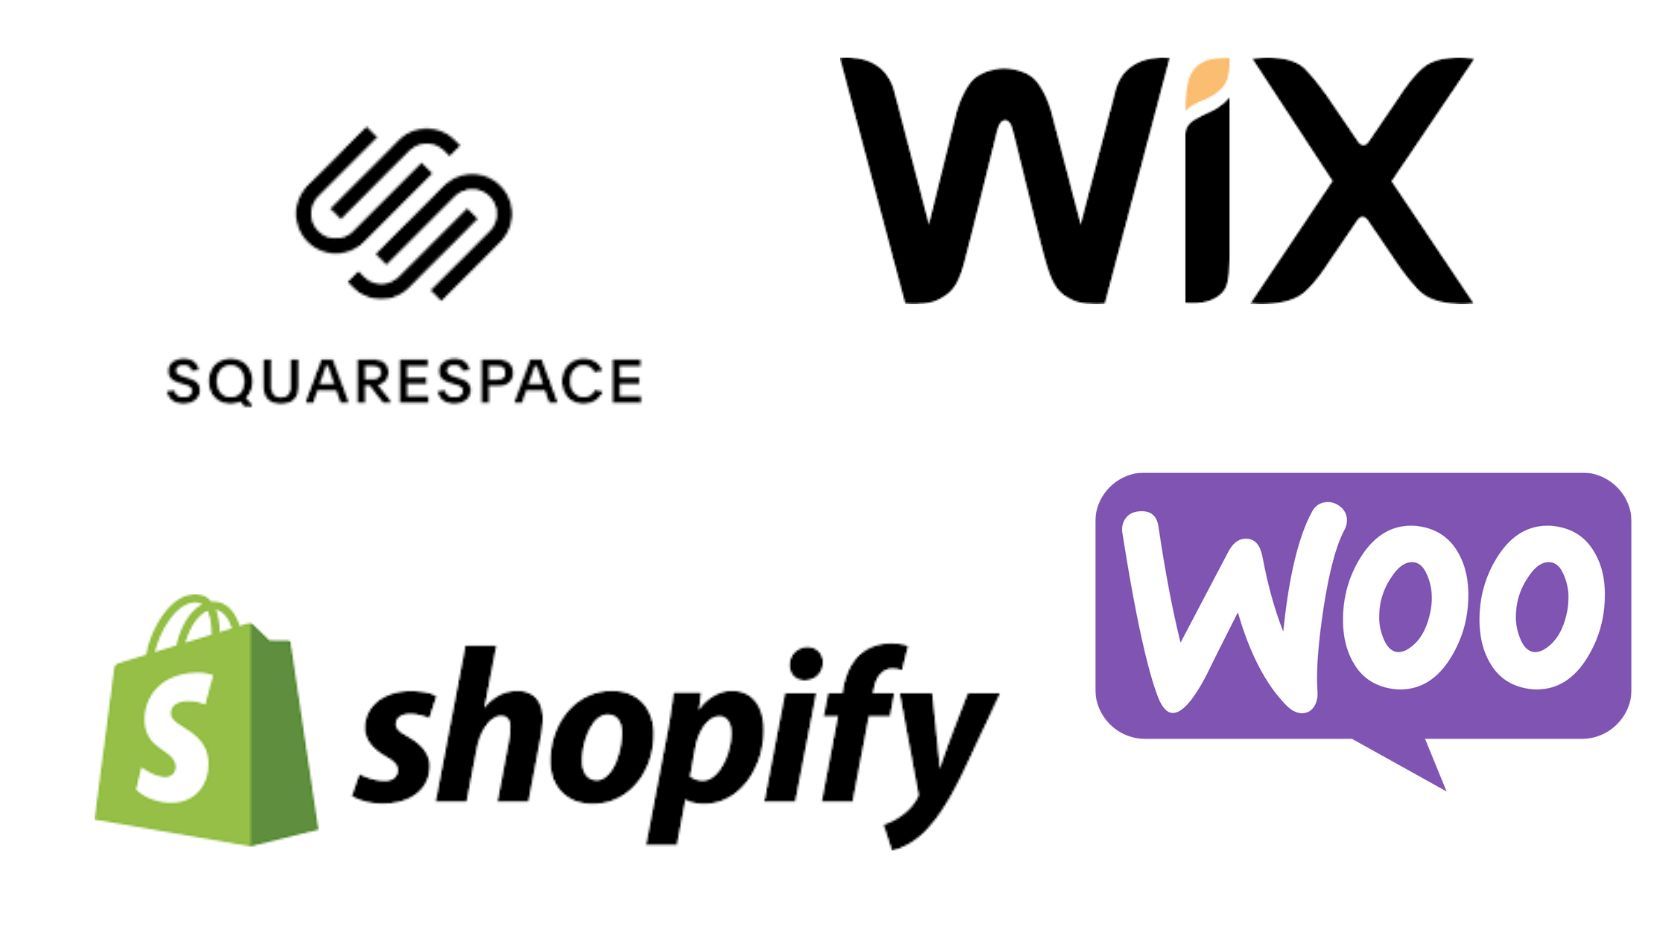 DCP's like Squarespace, Wix, Shopify and WooCommerce